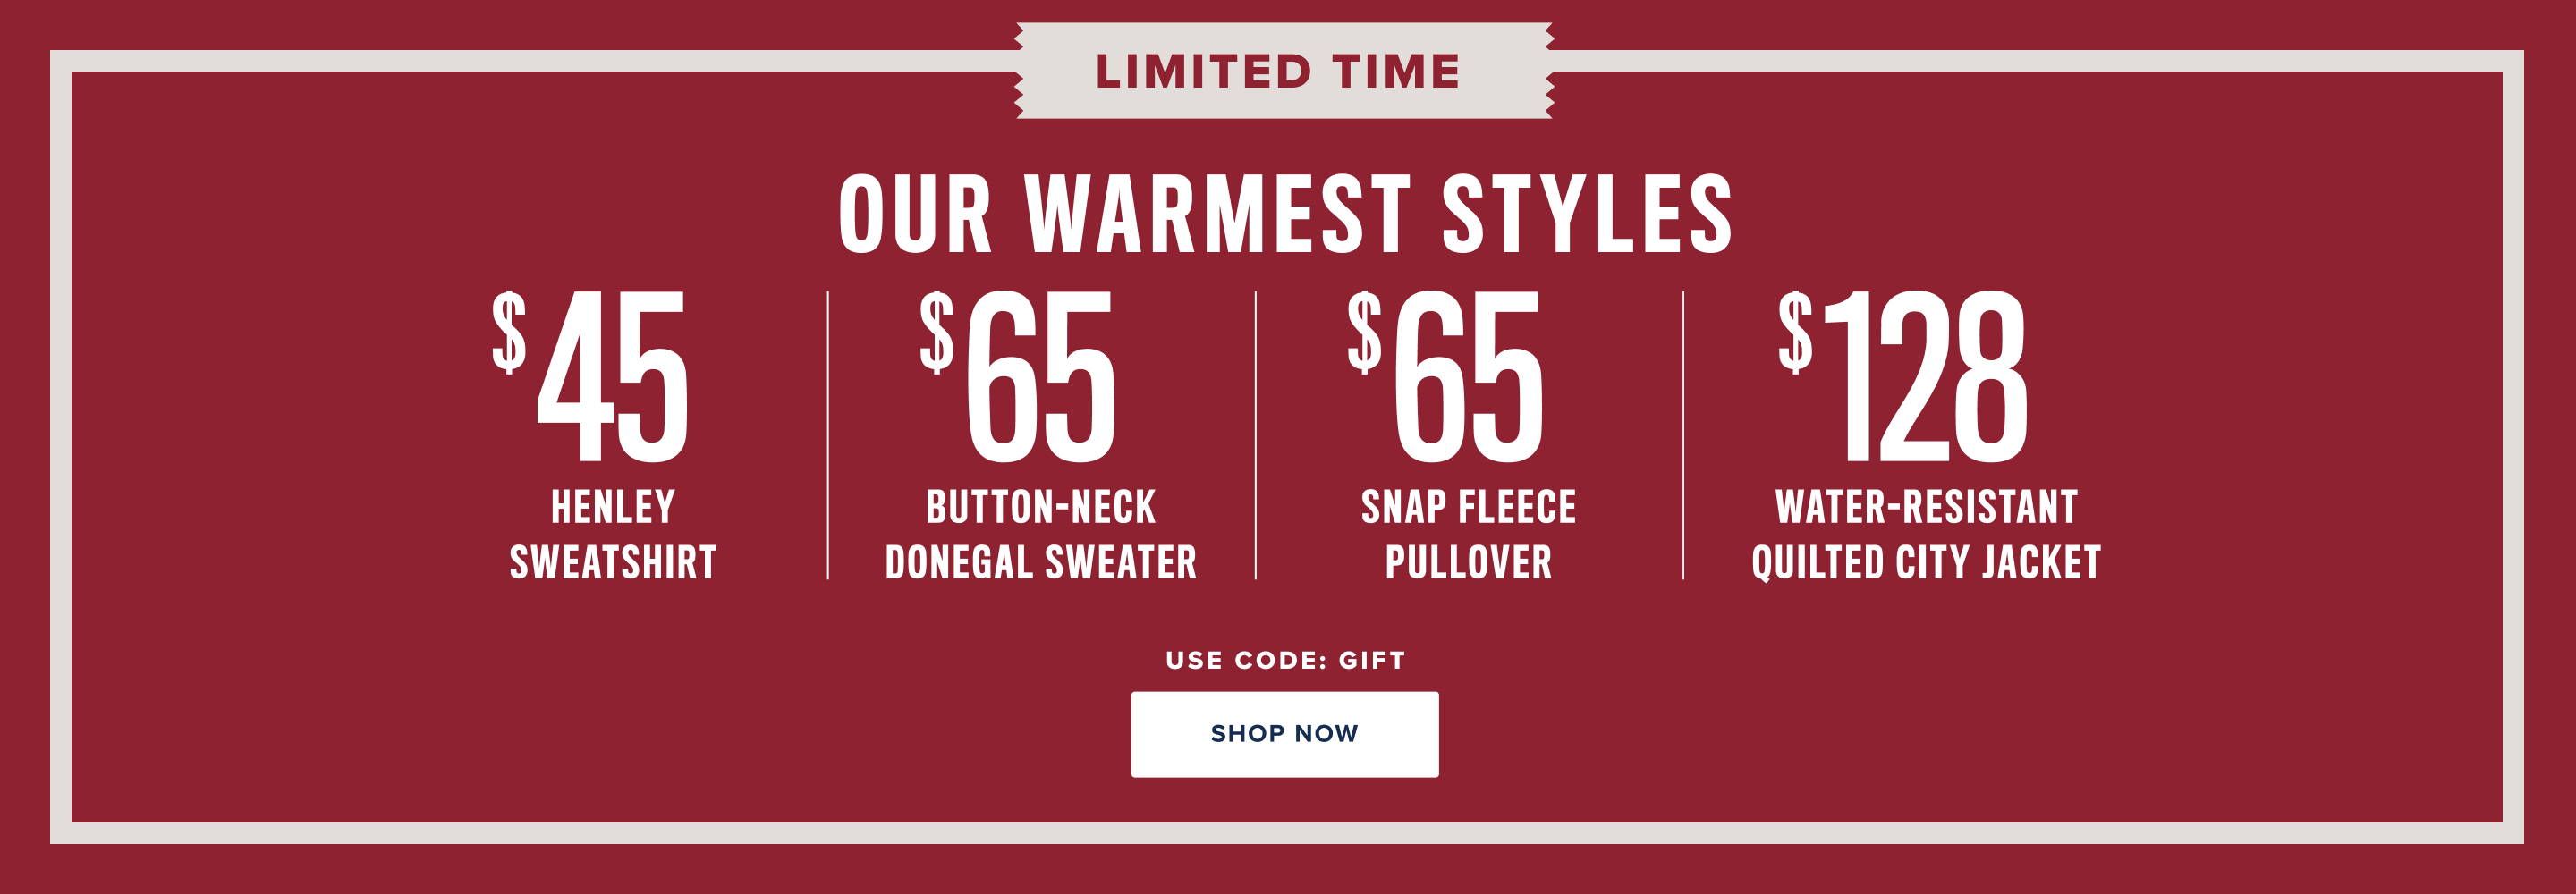 Limited Time Our warmest Styles. 